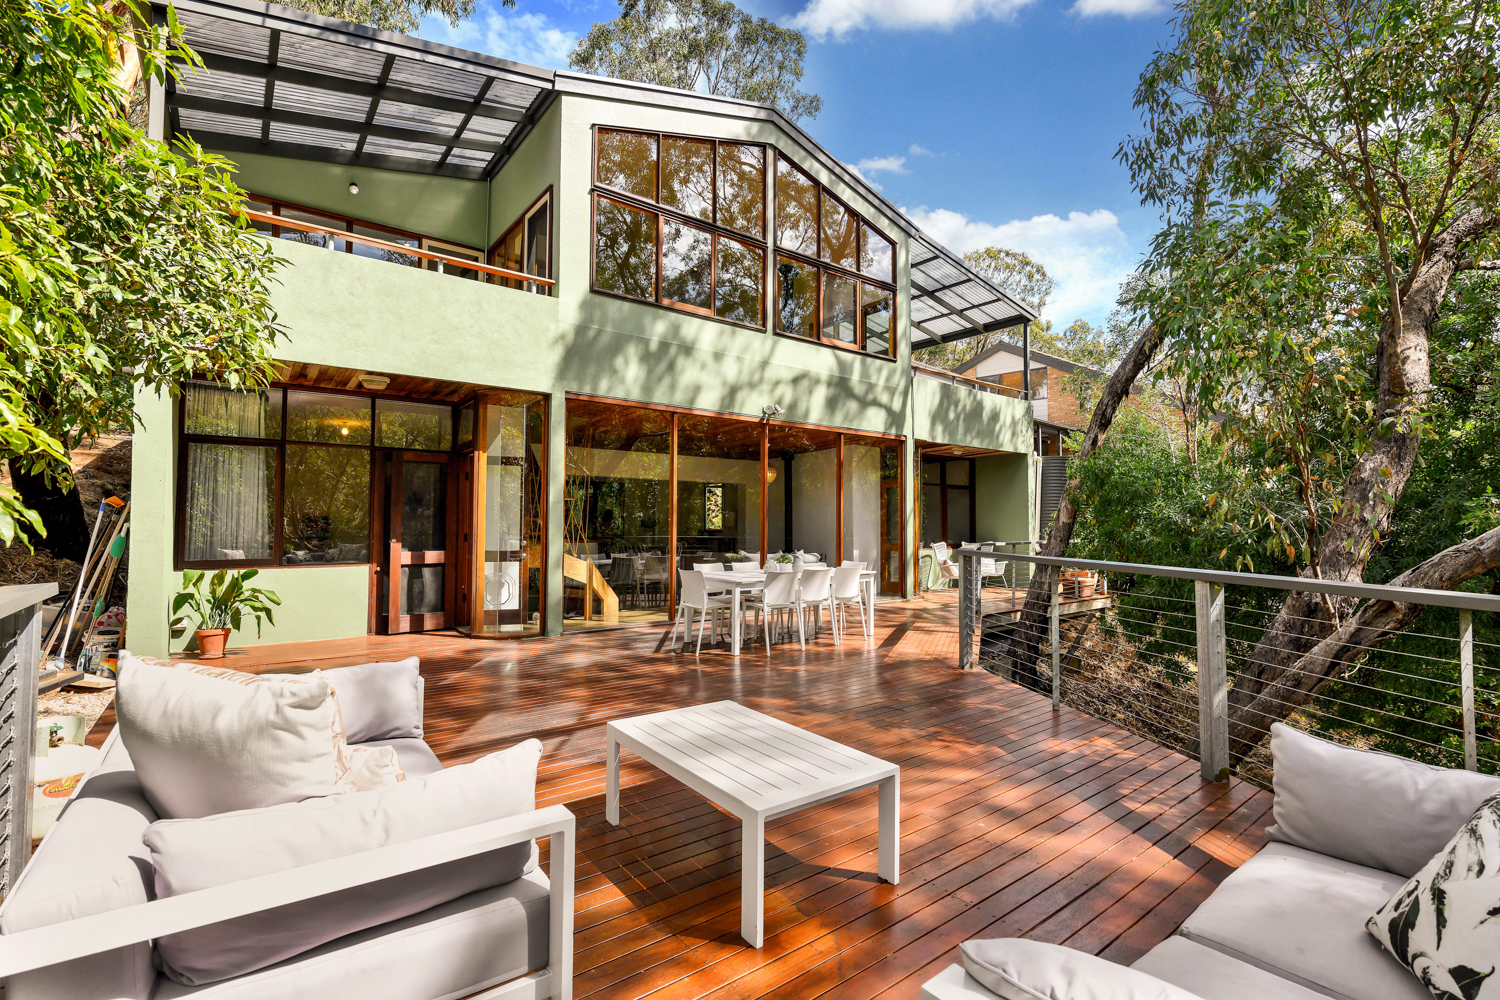 Byron Bay comes to the Adeliaide Hills in this magnificent versatile family home